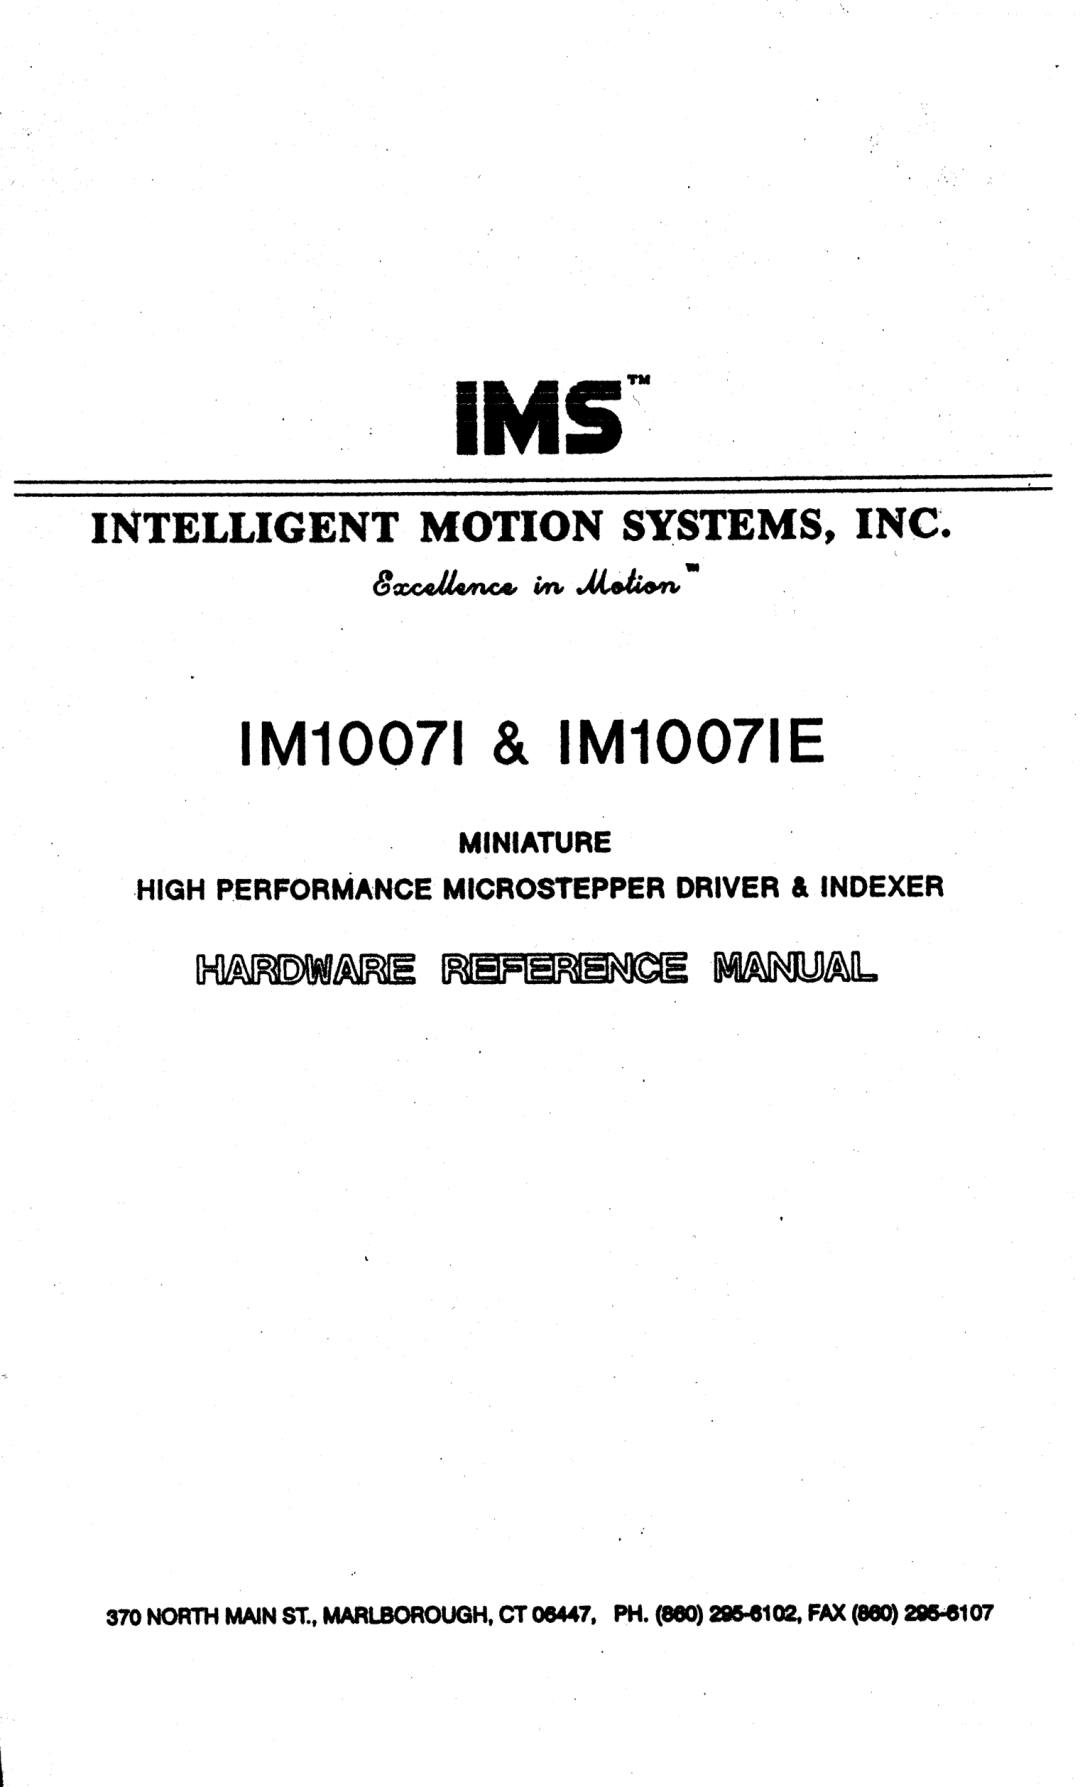 Intelligent Motion Systems IM1007 I/IE manual 